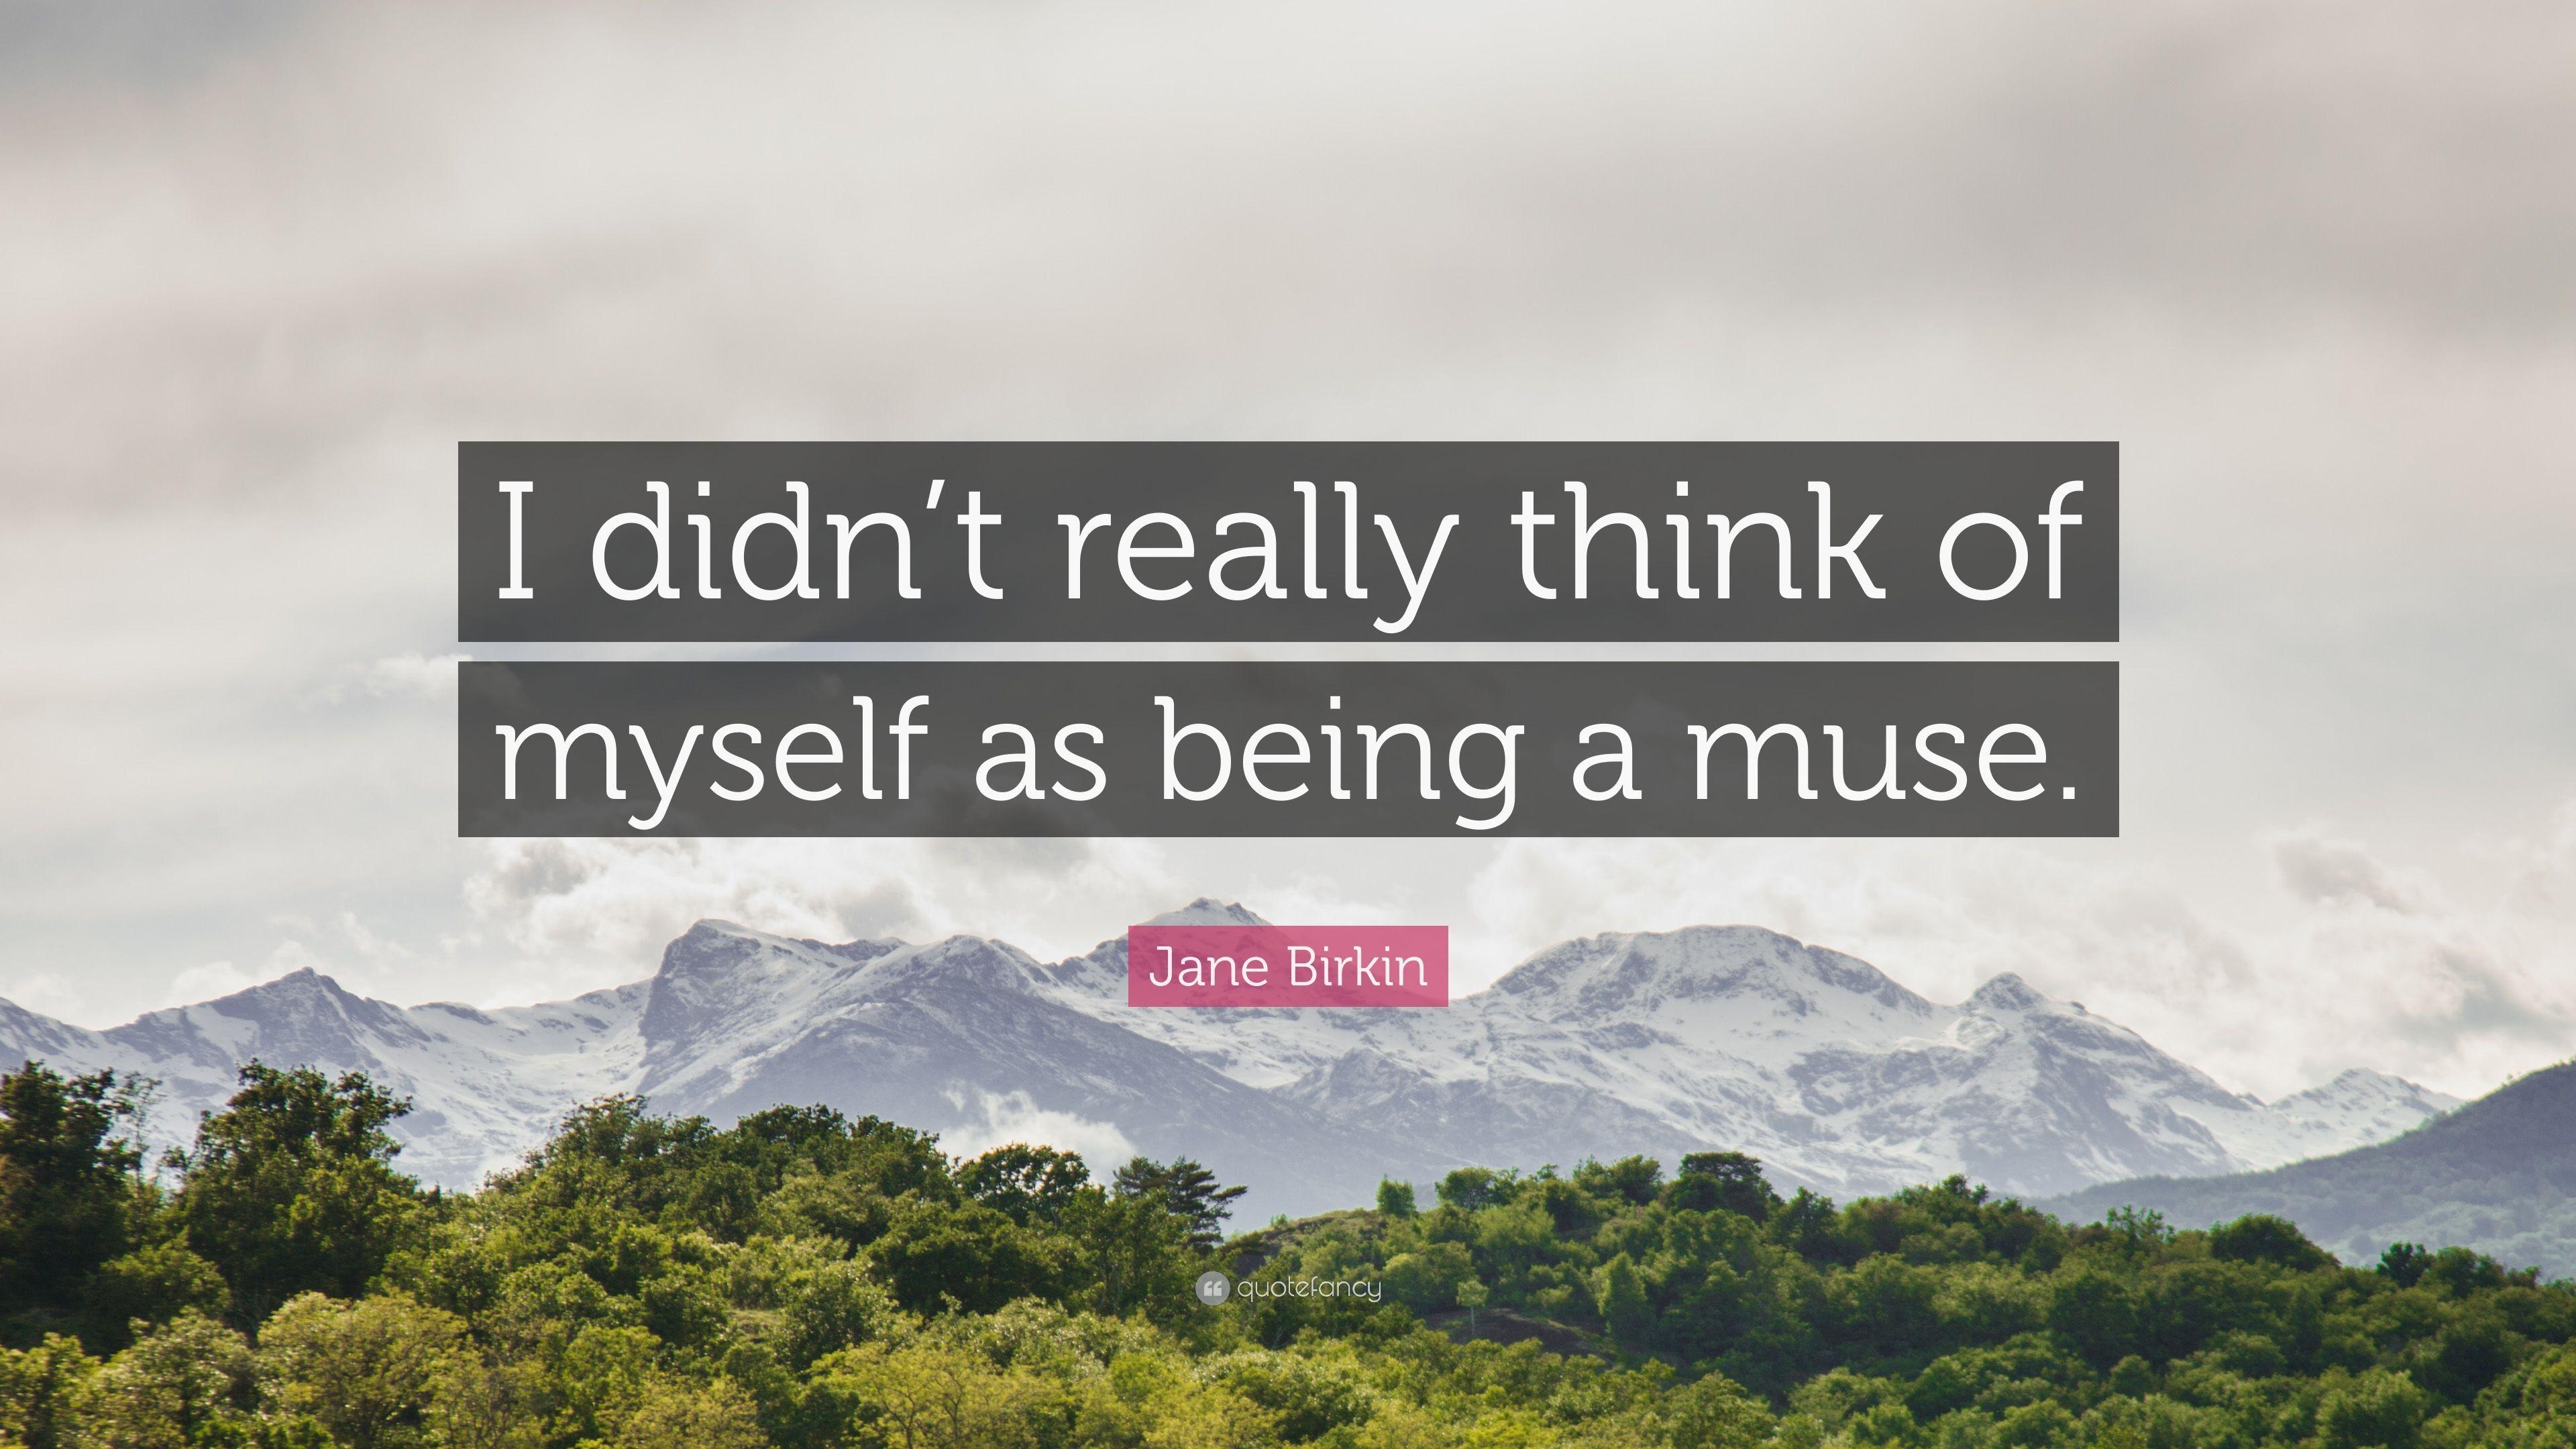 Jane Birkin Quote: “I didn't really think of myself as being a muse